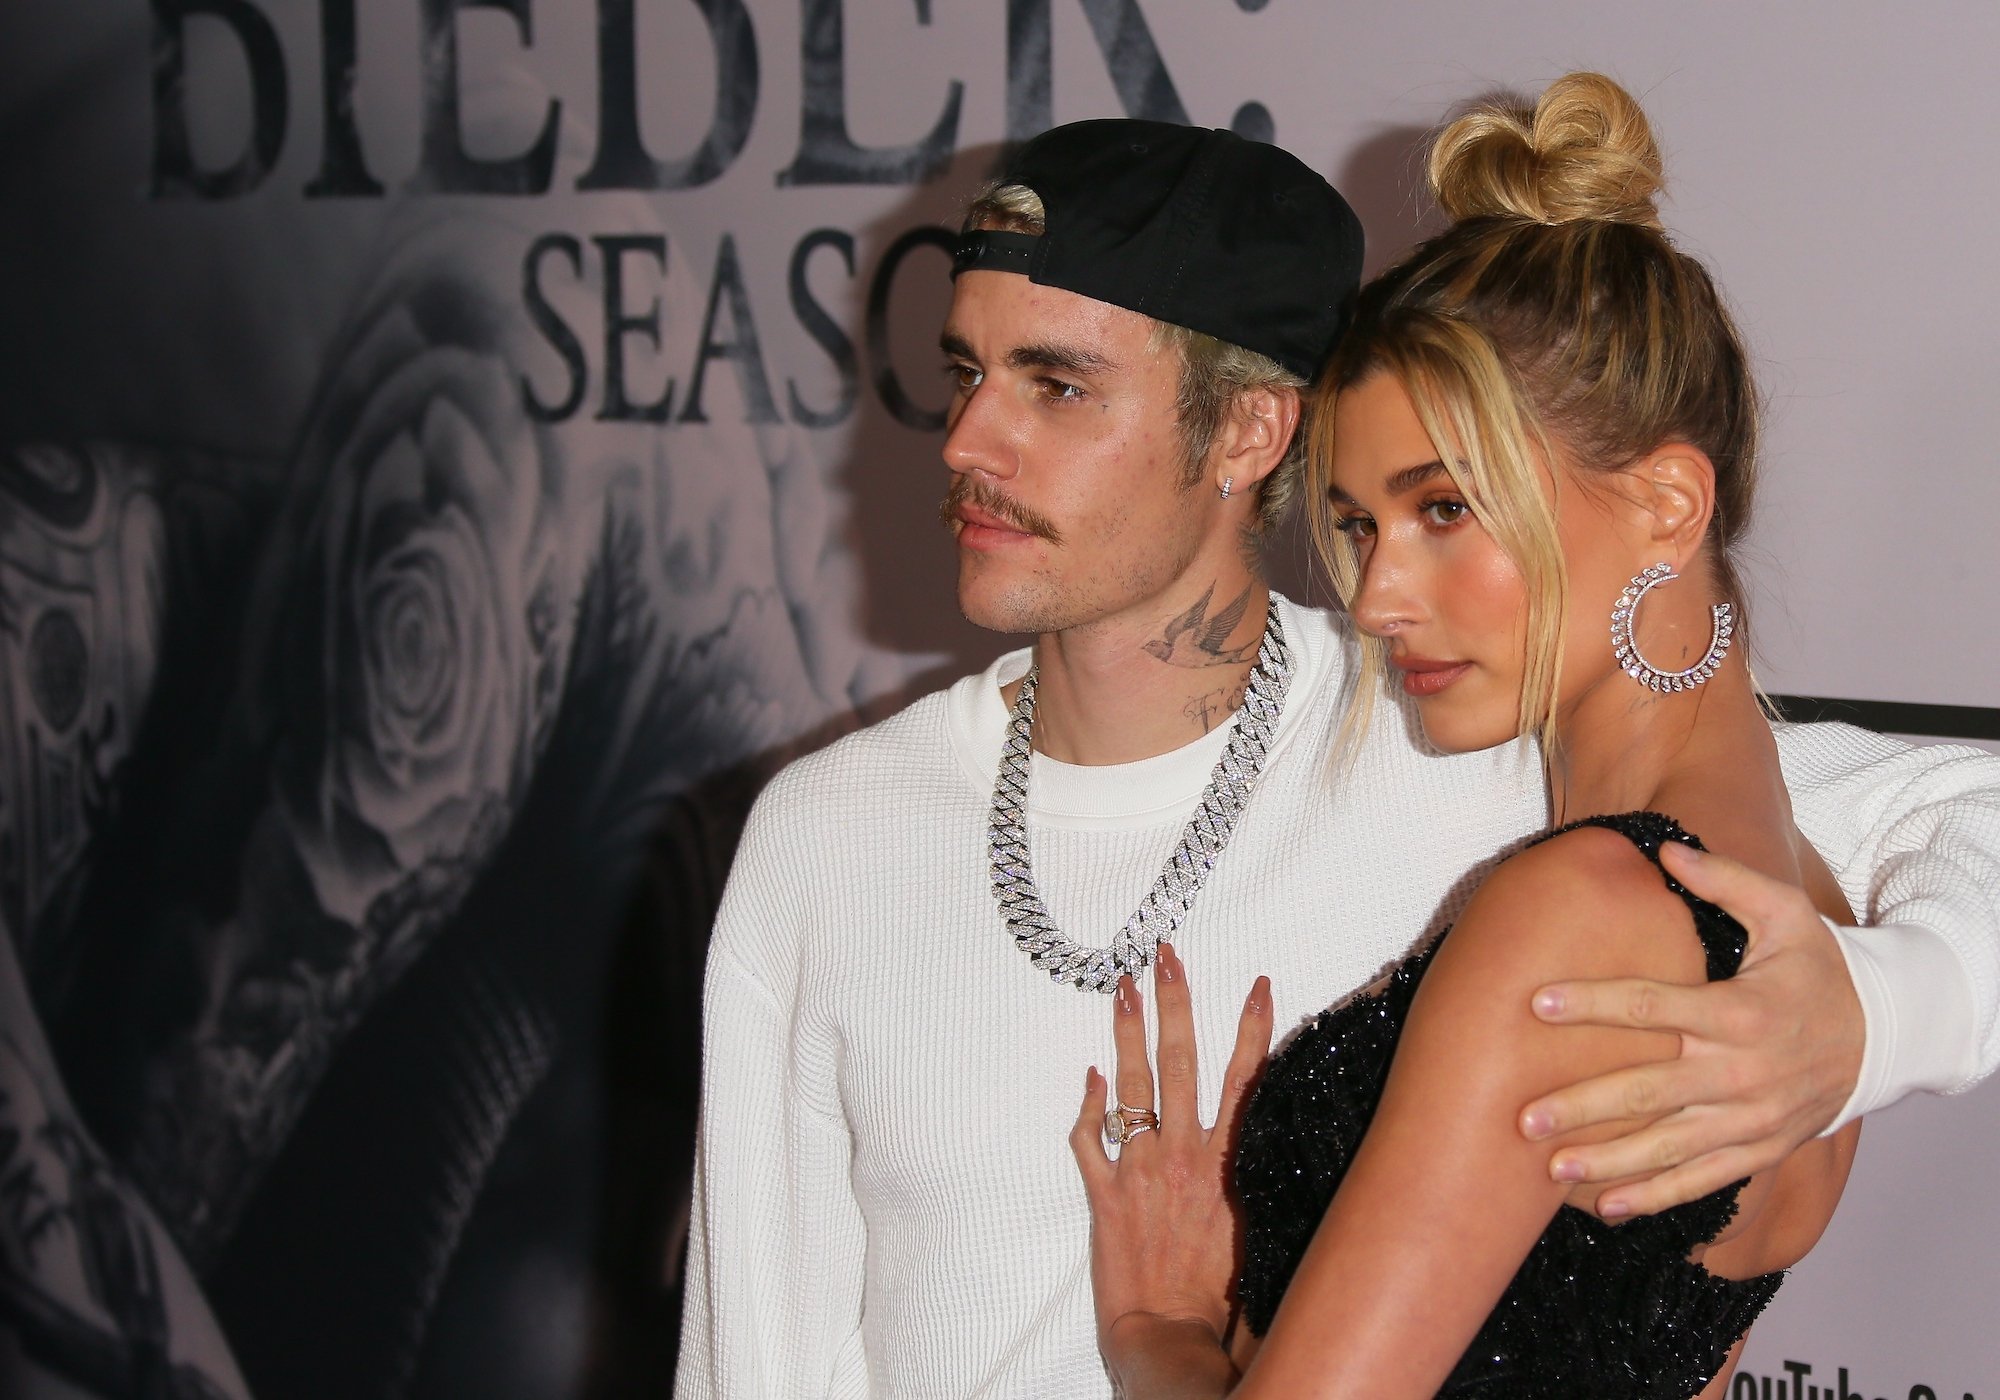 (L-R) Justin Bieber and Hailey Bieber embracing in front of a dark background